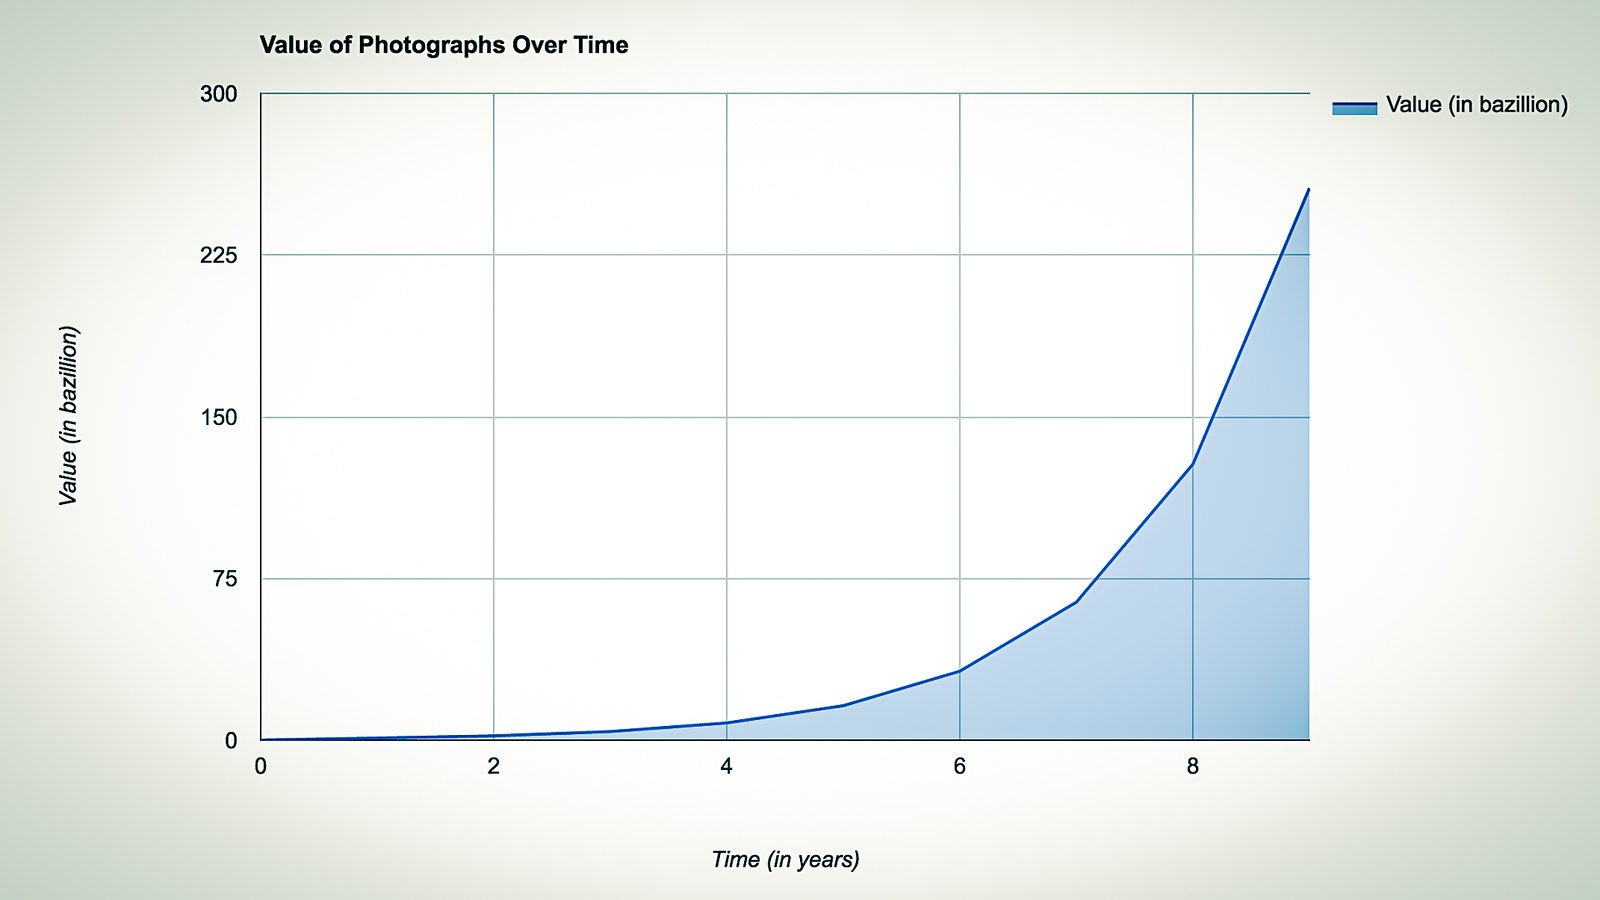 Value of Photographs Over Time